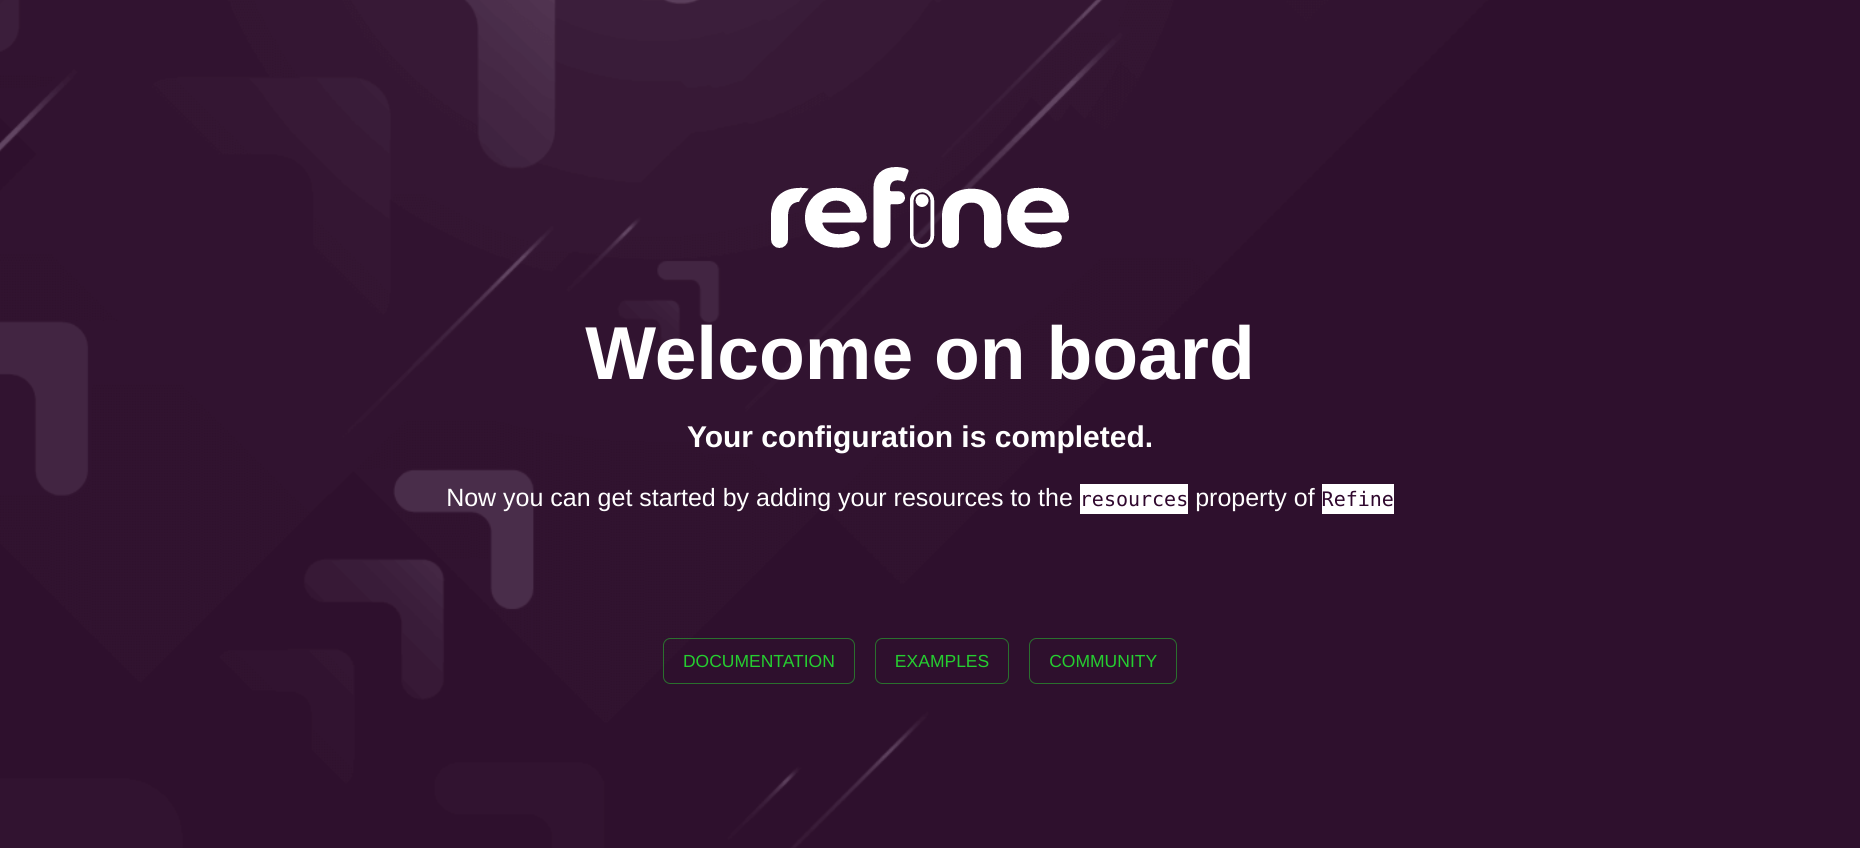 refine project template landing page